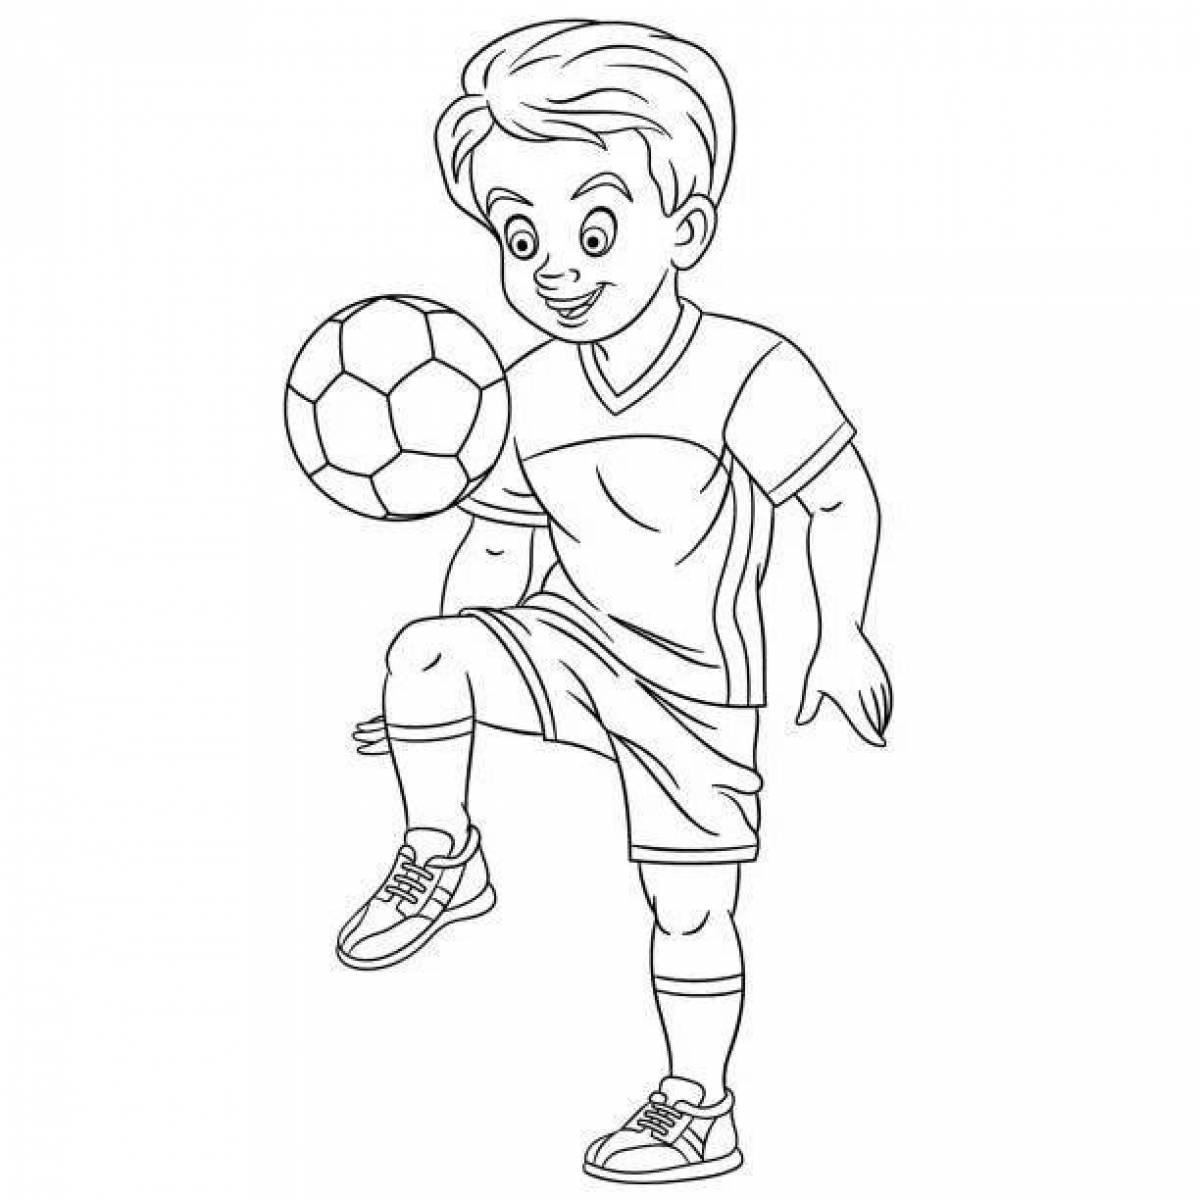 Persistent soccer player coloring page